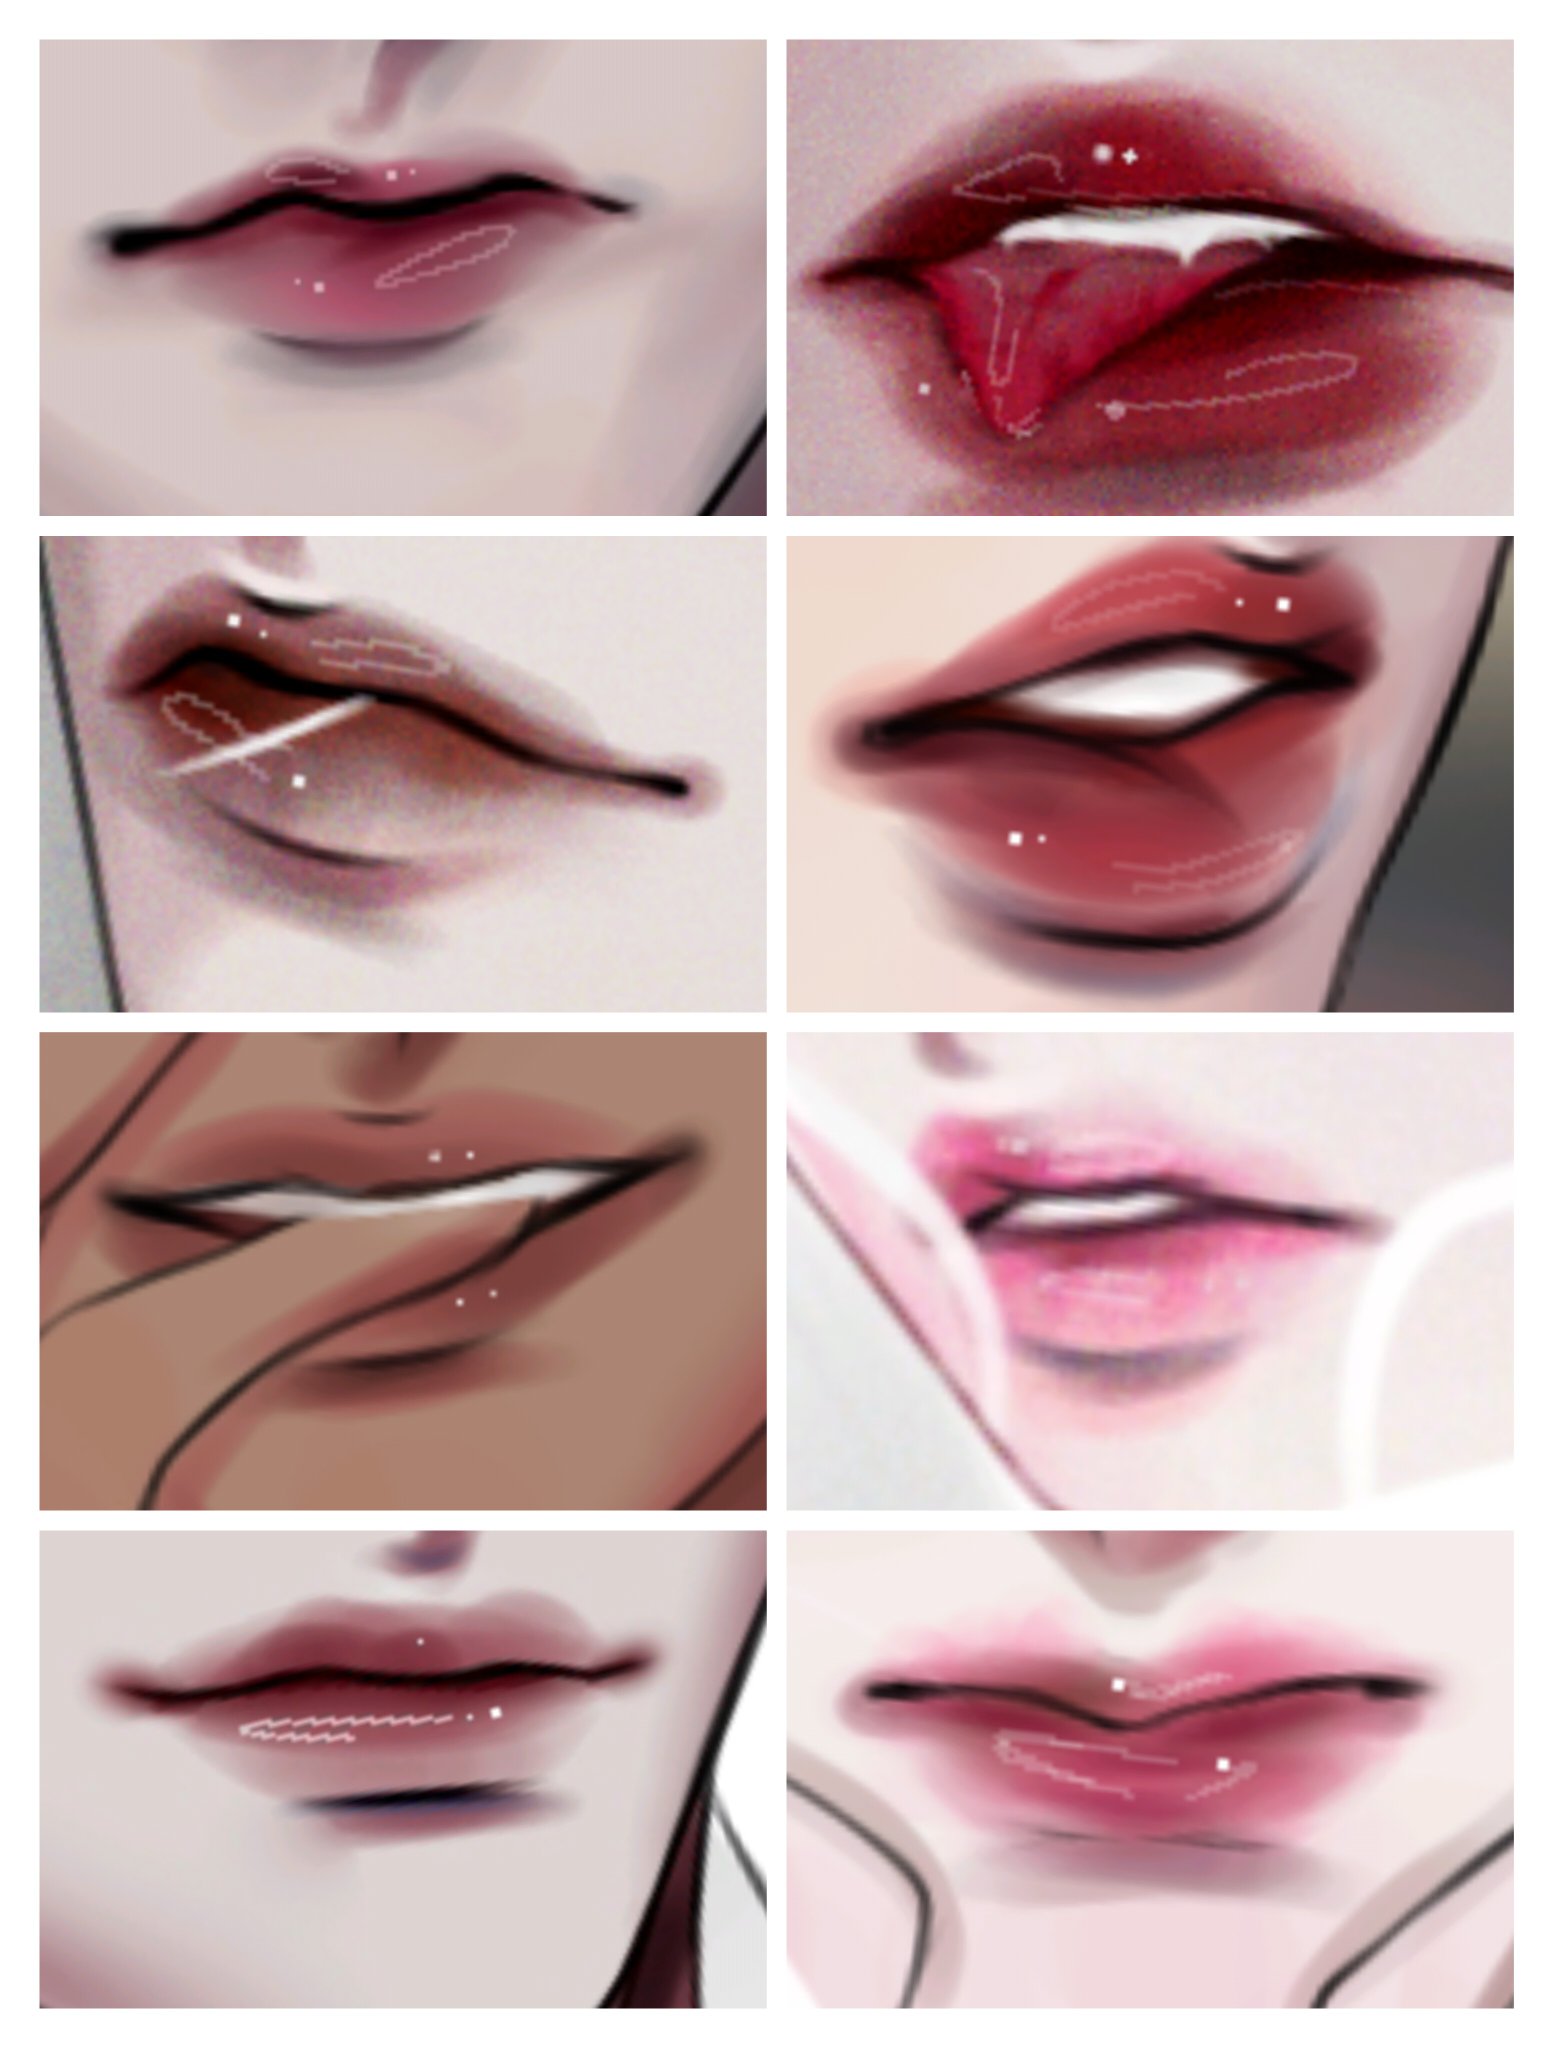 How to Draw Aesthetic Lips Step by Step Guide - Drawing All